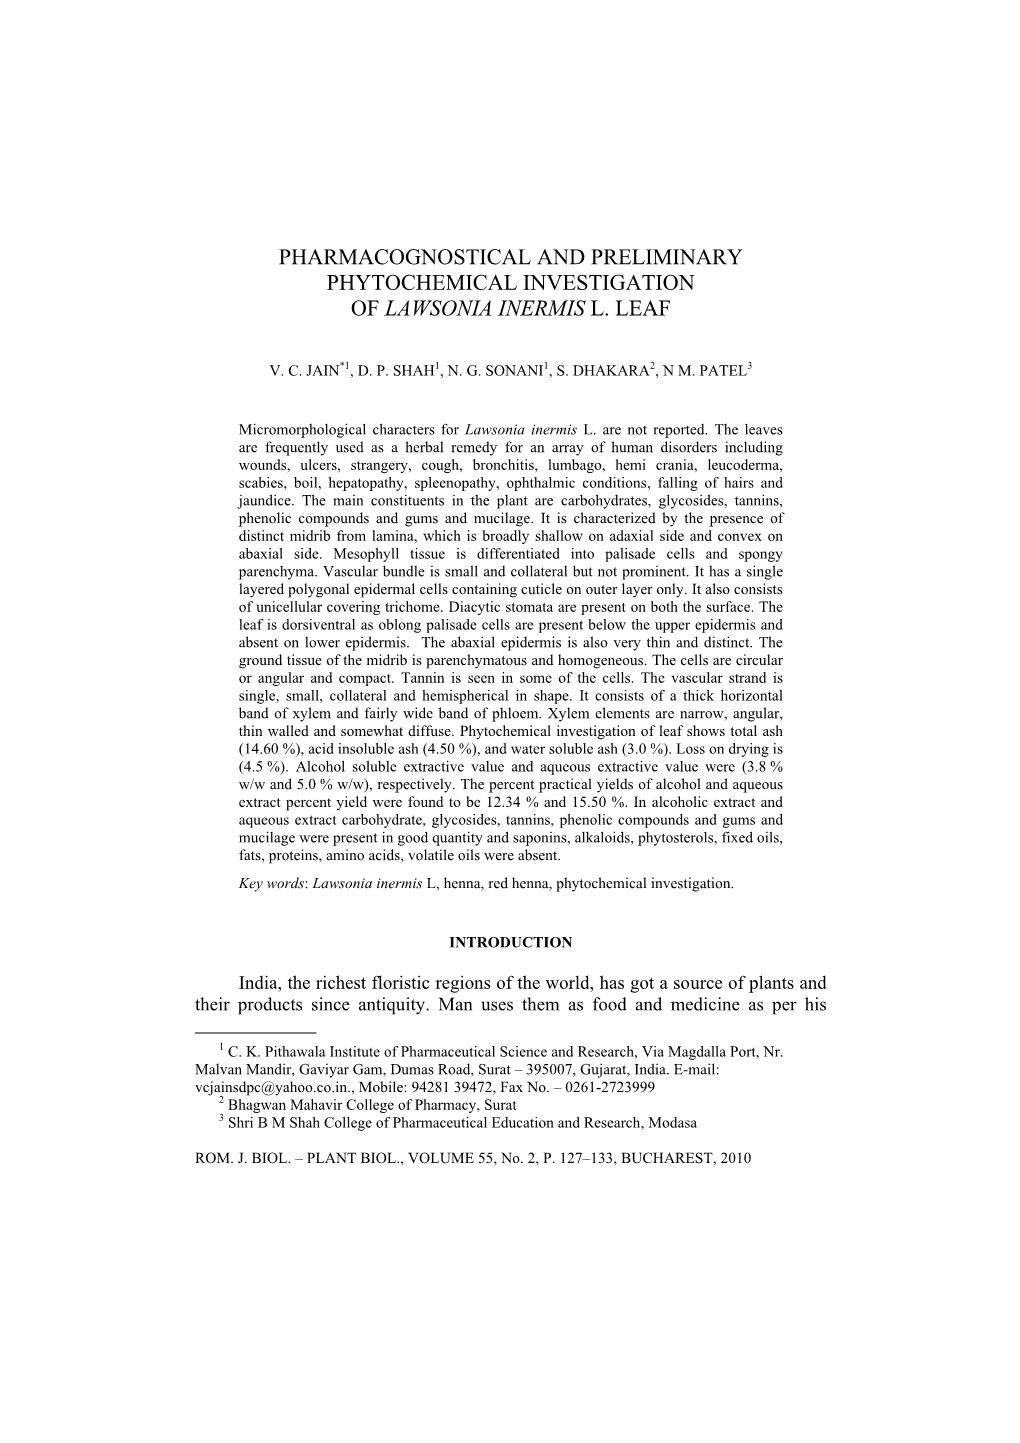 Pharmacognostical and Preliminary Phytochemical Investigation of Lawsonia Inermis L